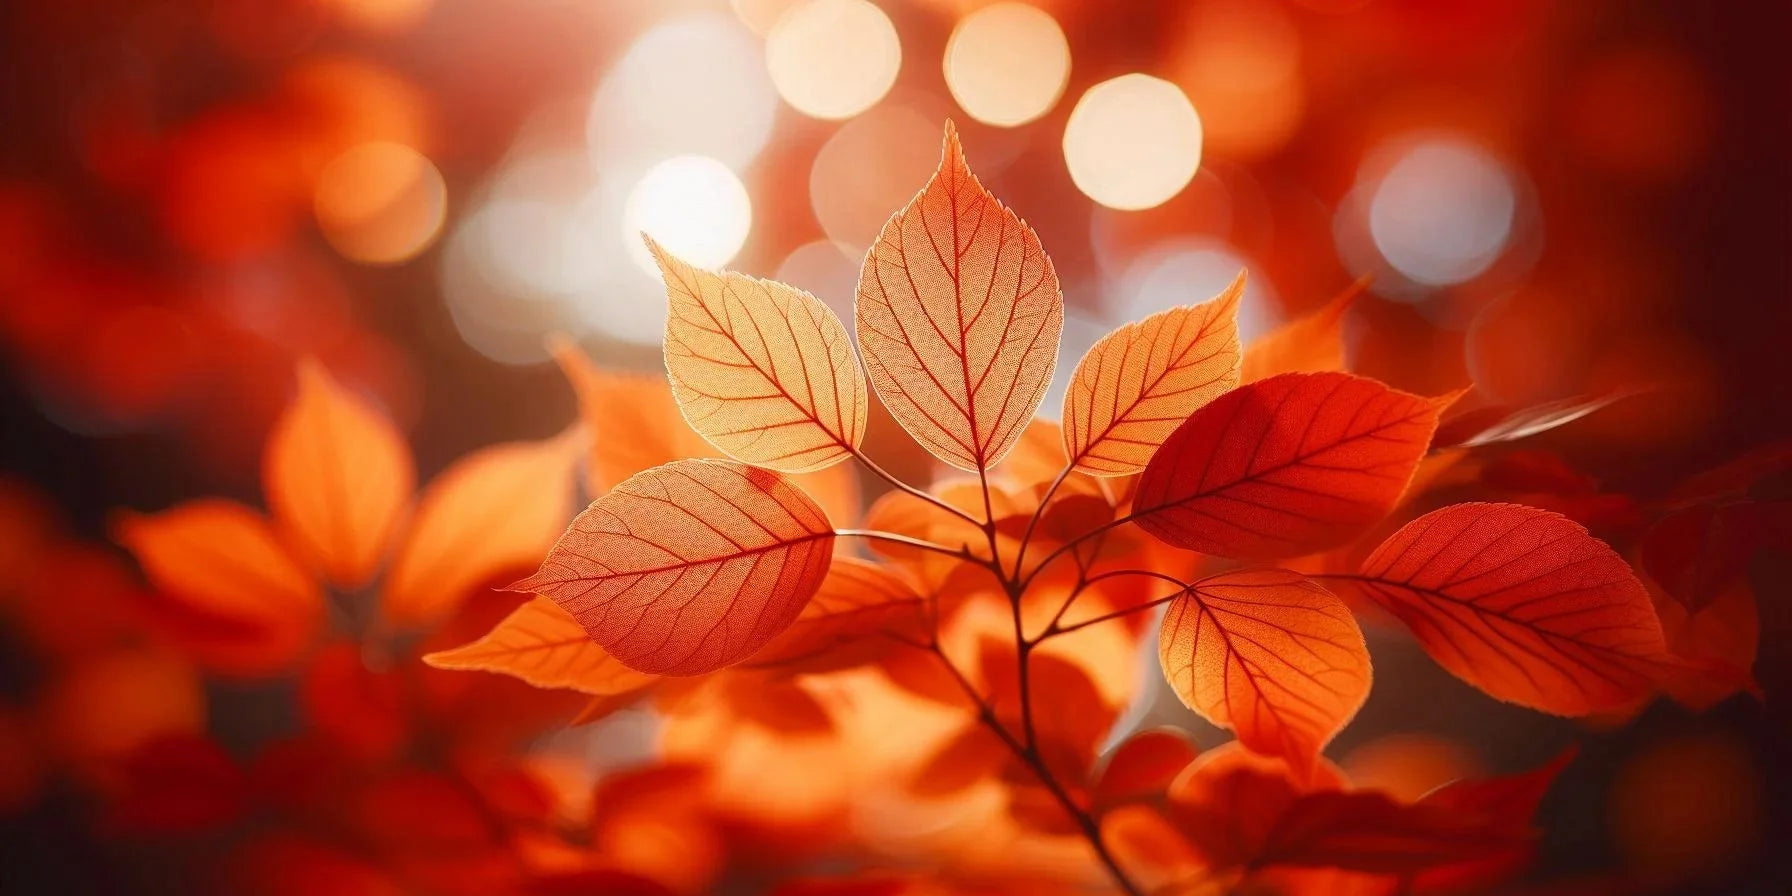 Autumn Leaves Banner Image